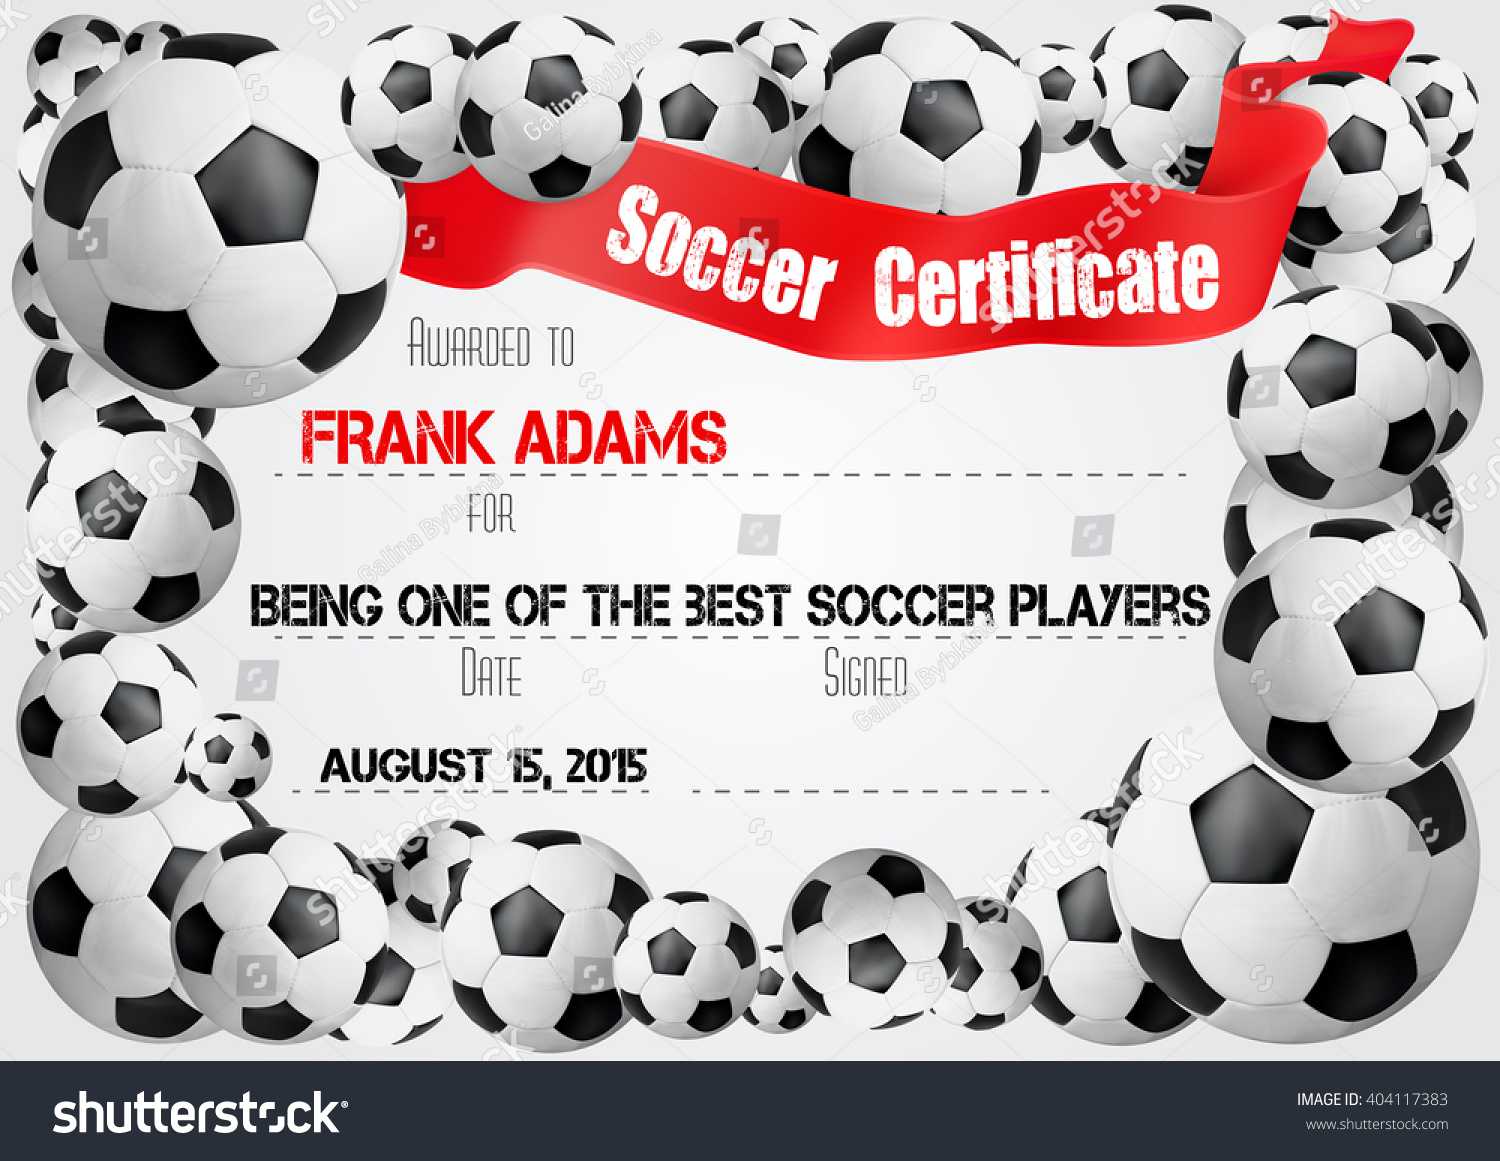 Soccer Certificate Template Football Ball Icons Stock Vector With Regard To Soccer Certificate Template Free